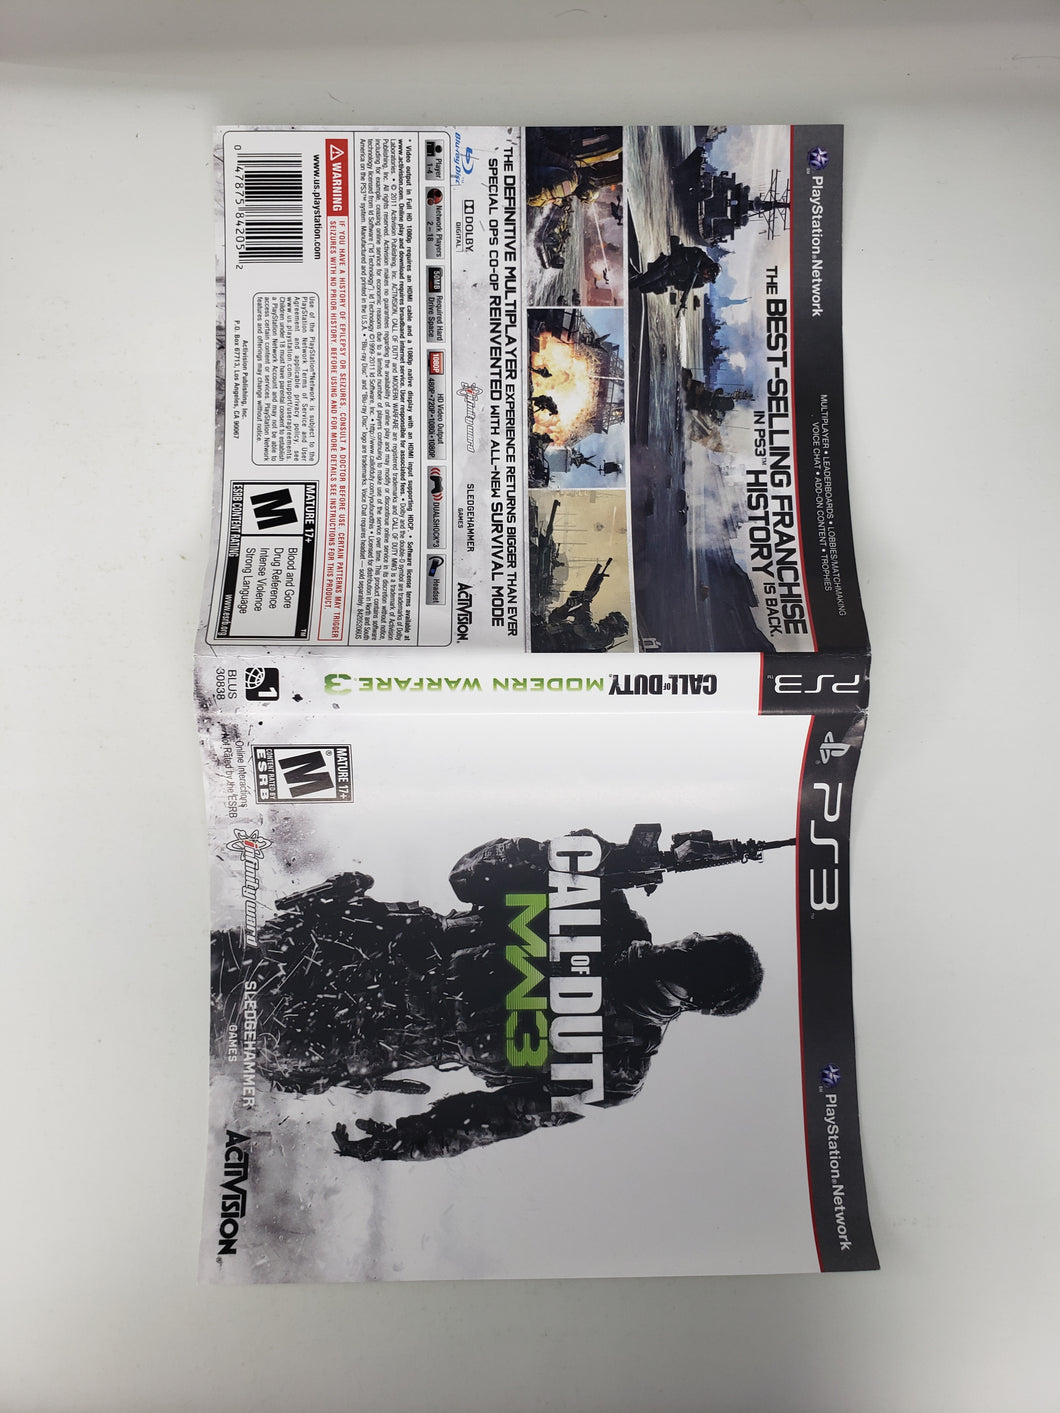 Call of Duty Modern Warfare 3 [Couverture] - Sony Playstation 3 | PS3